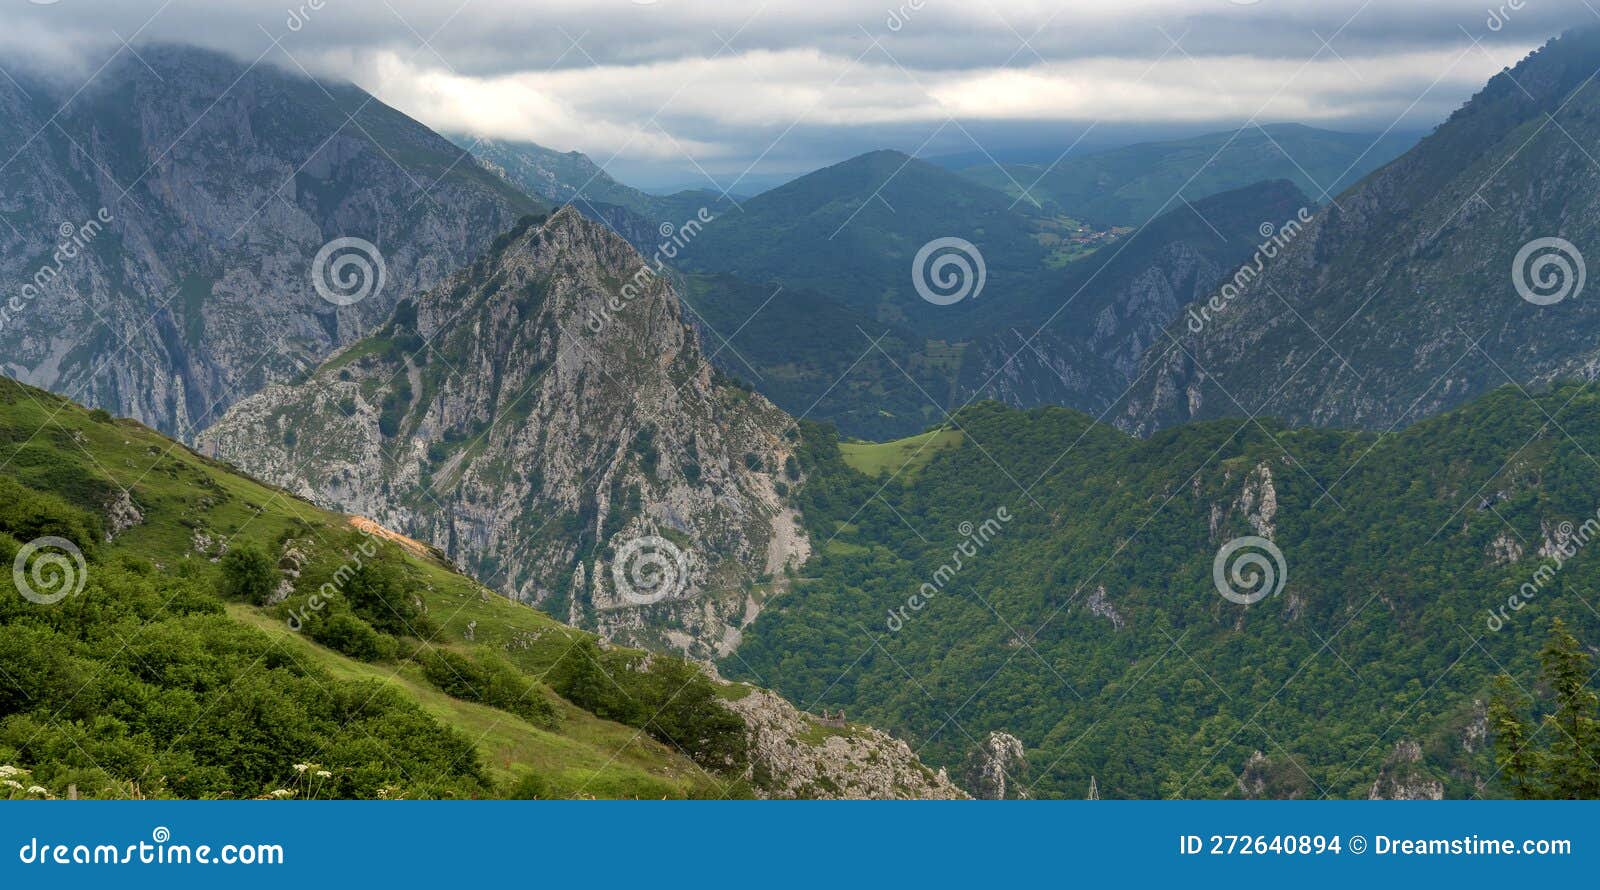 central massif from sotres, picos de europa national park, spain